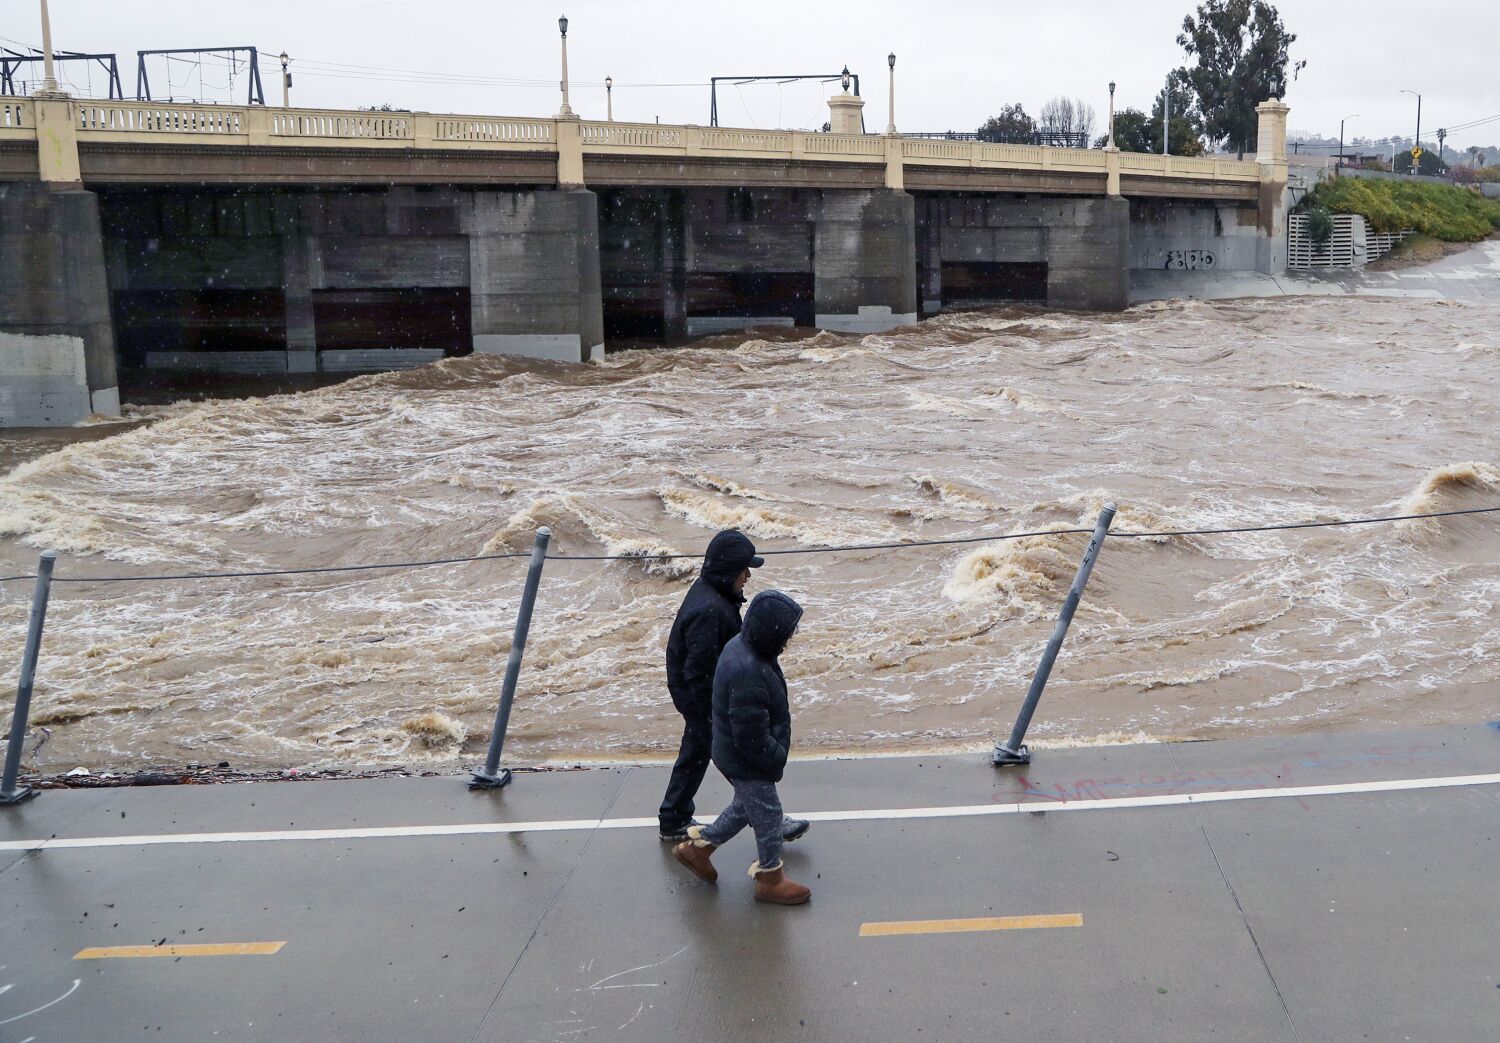 As storms continue to strike, concern grows about Los Angeles River's 'choke point'